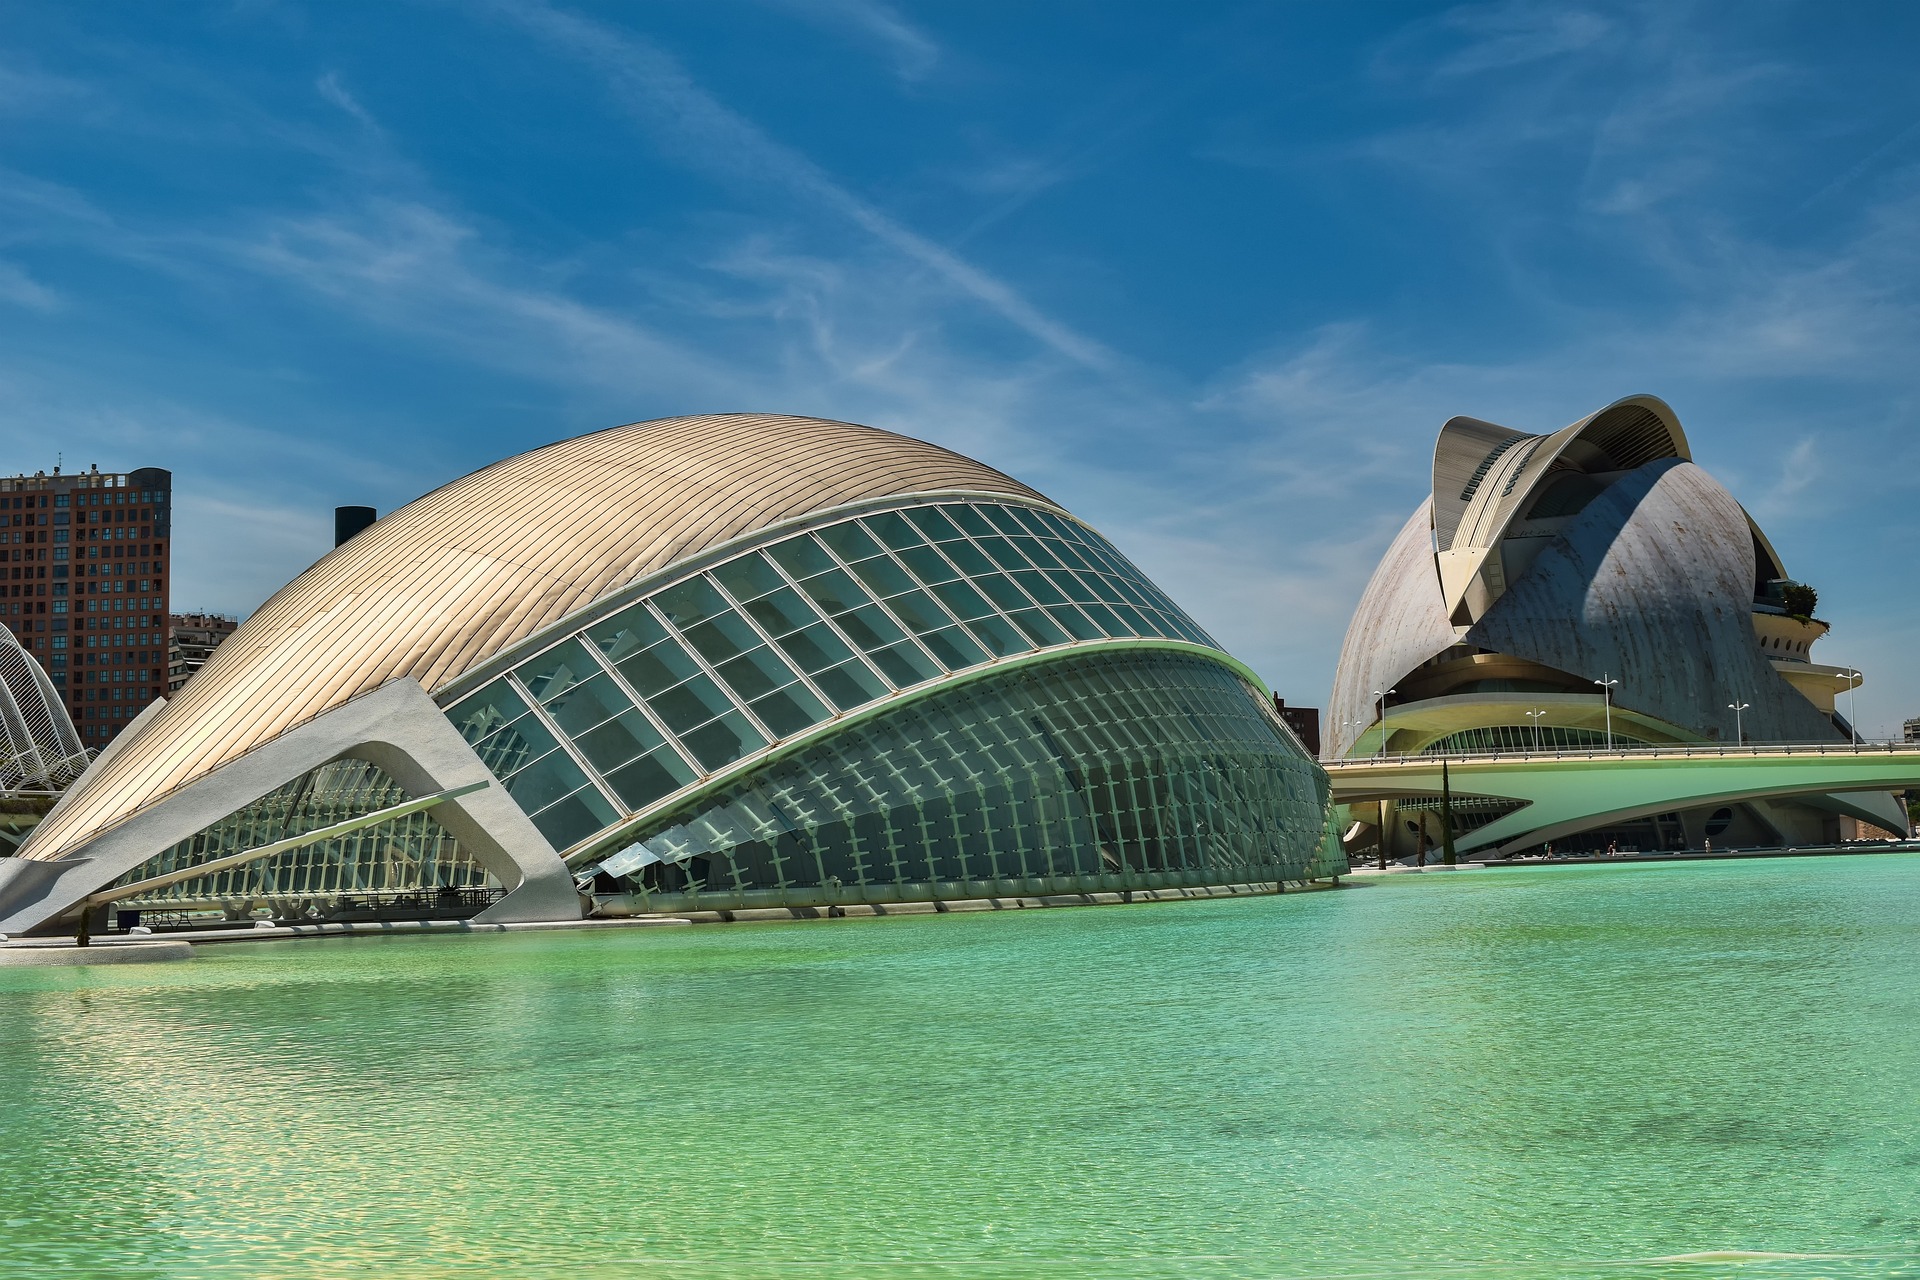 Free tour of Valencia and activities